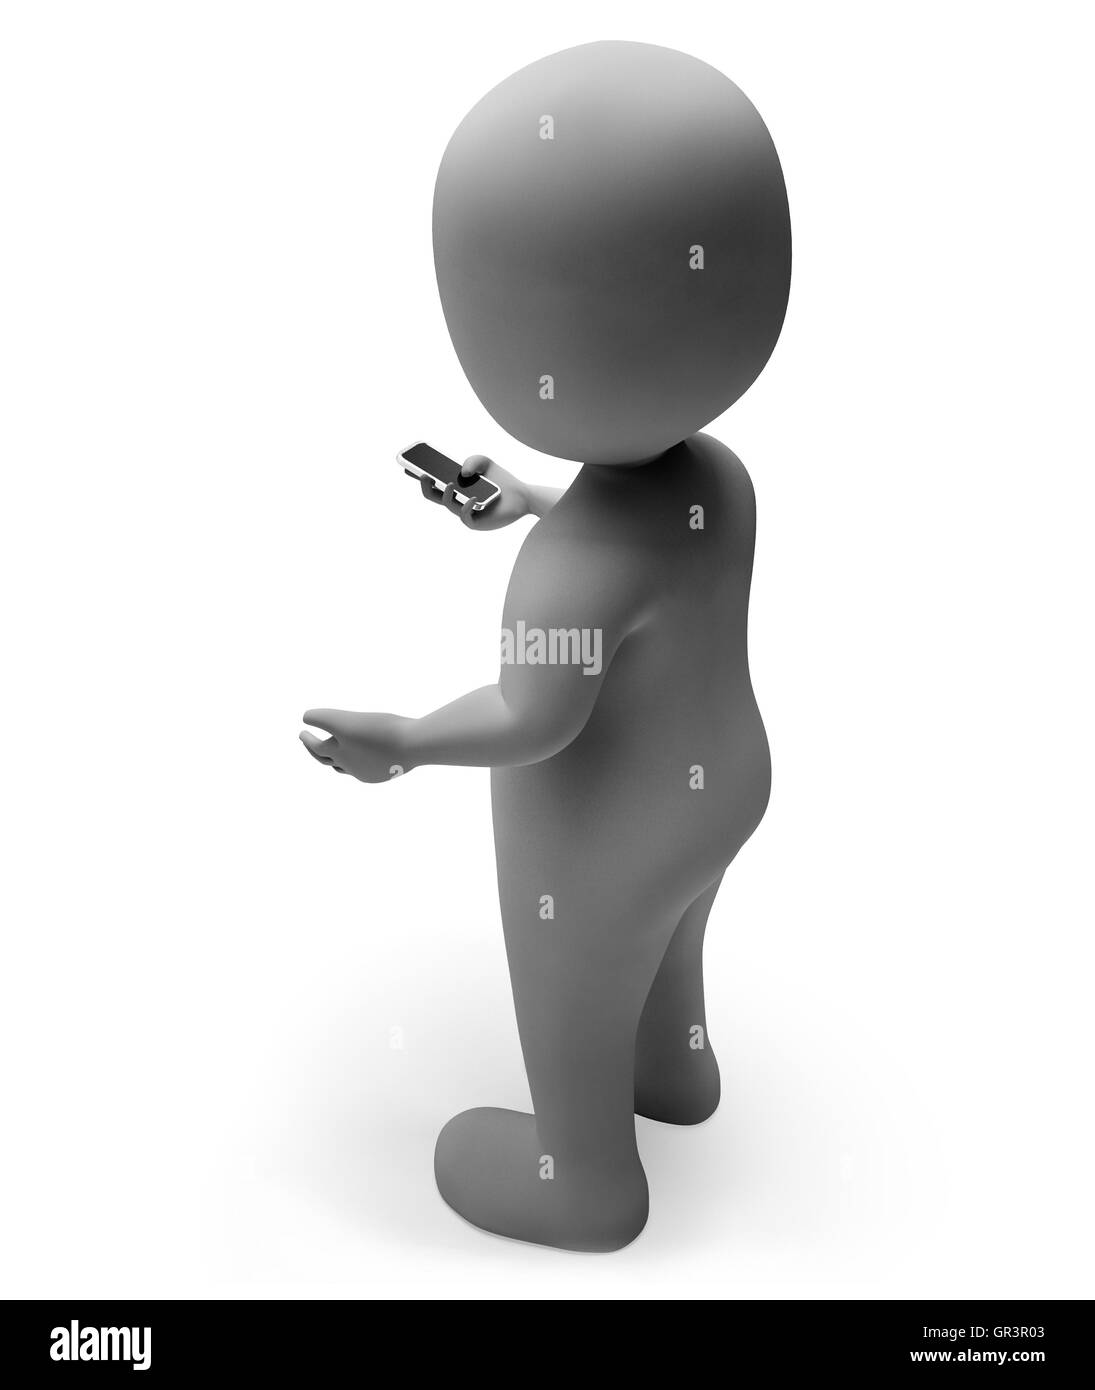 Calling Smartphone Showing Message Communicate And Networking 3d Rendering Stock Photo